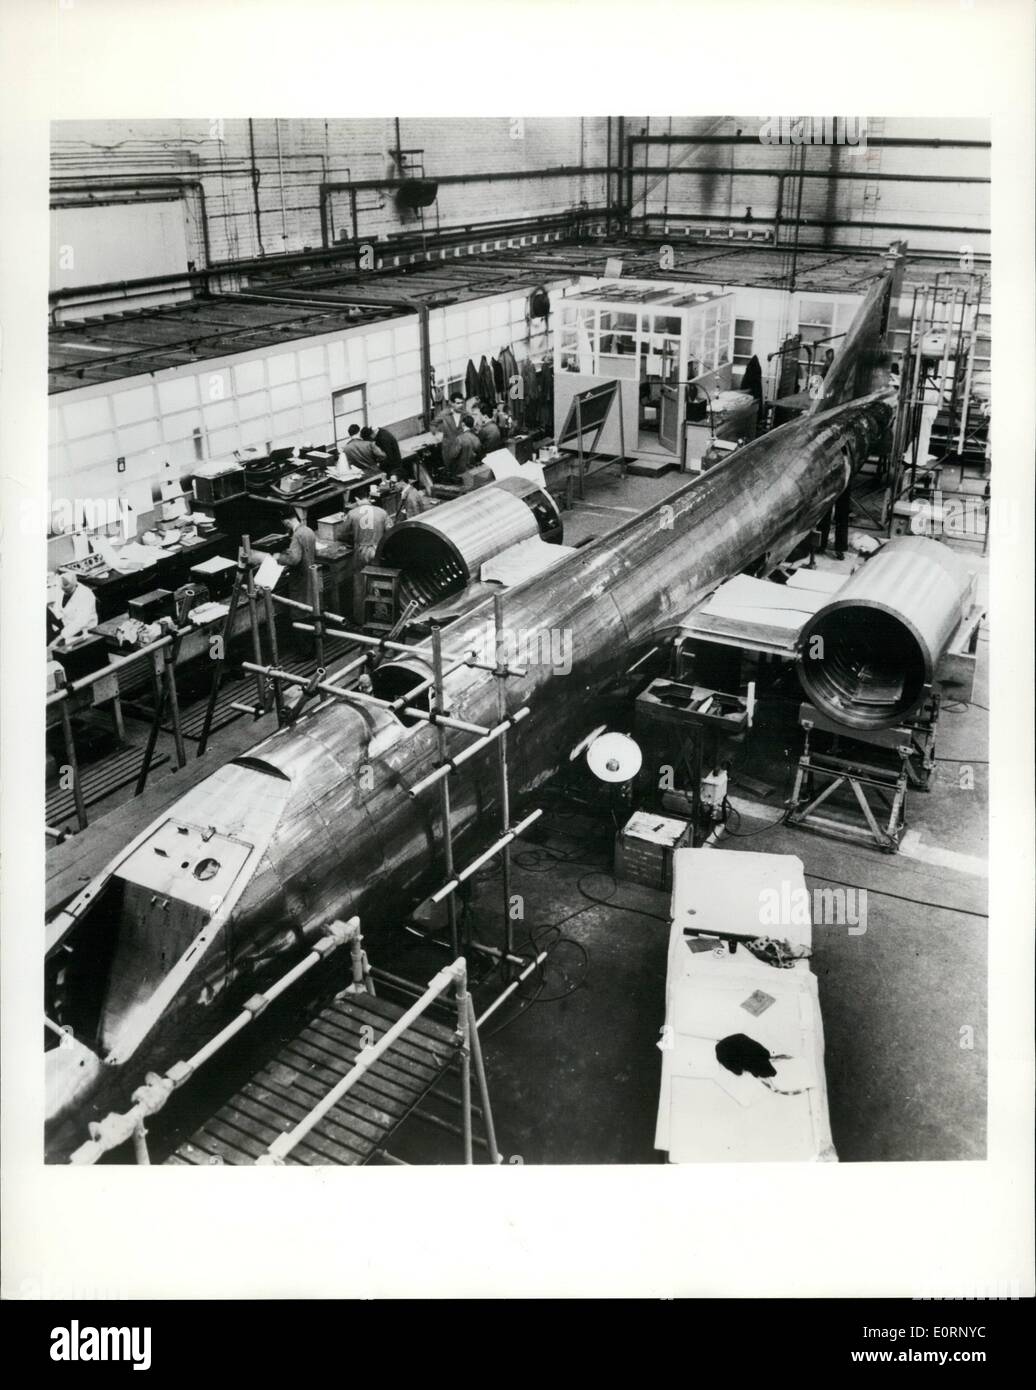 Feb. 02, 1960 - 1,500 Mph Steel Aircraft Takes Shape. The Bristol Type 188, stainless steel, welded, research aircraft, designed to fly at 1,500 Mph, under construction at Filton, England. Due to begin tests this year, the single seat 188 will be powered by two De Havilland Gyron, reheated, turbo jet engines and intended for the investigation of the problems of high speed flight in which heat plays a great part Stock Photo